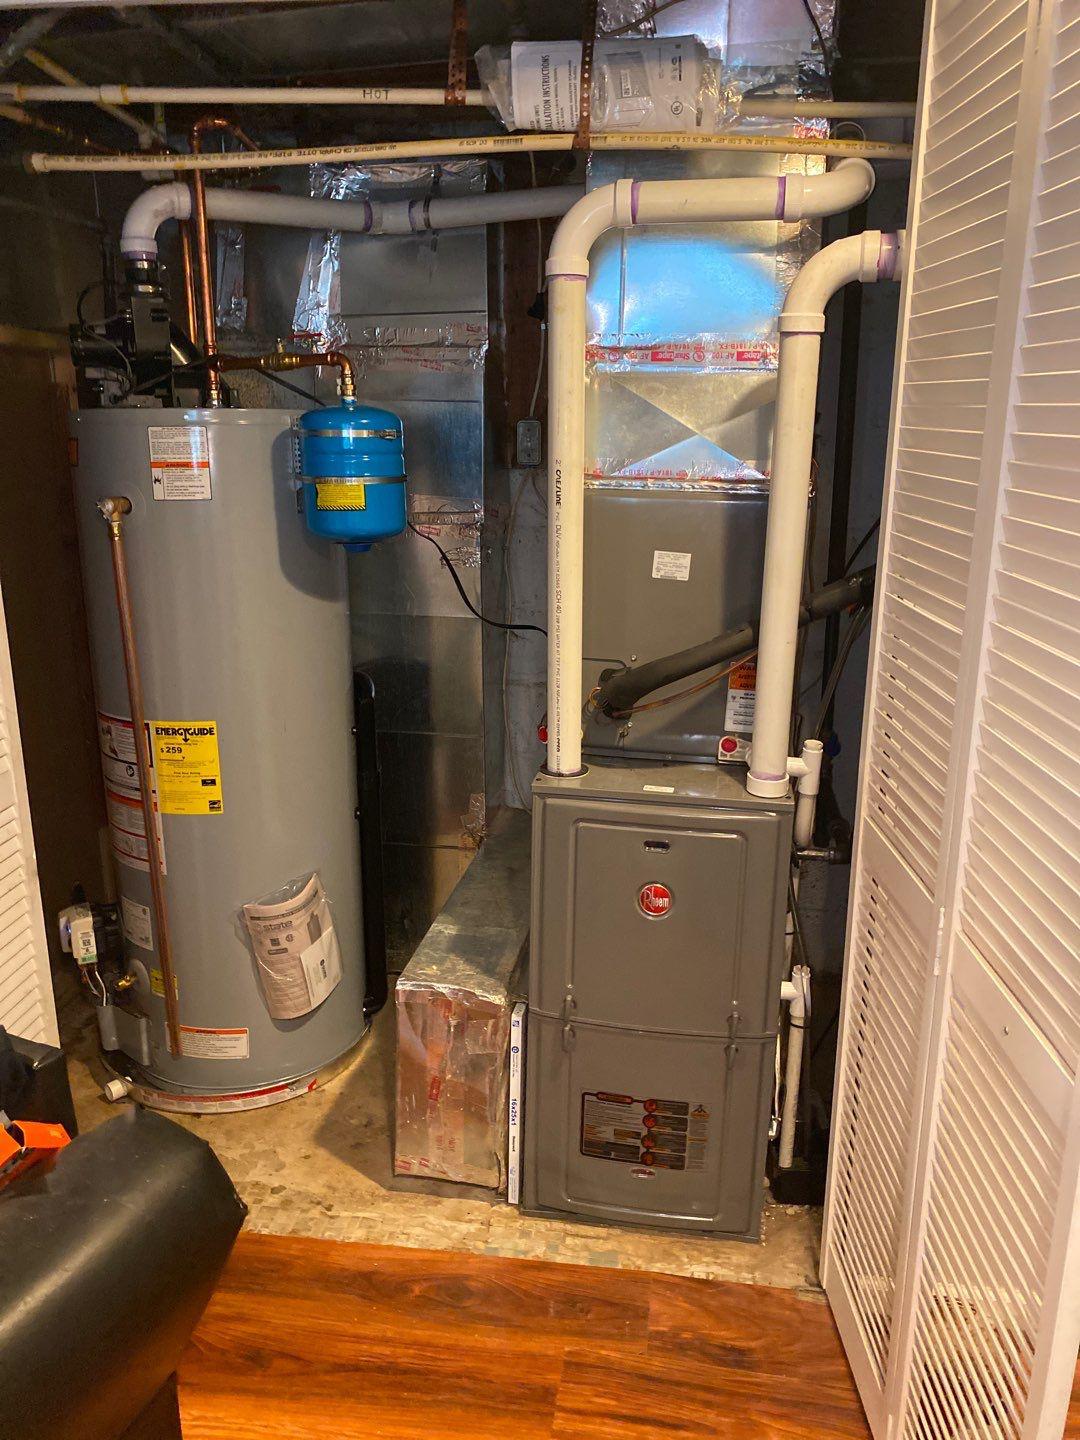 fry plumbing, heating, and cooling full HVAC unit